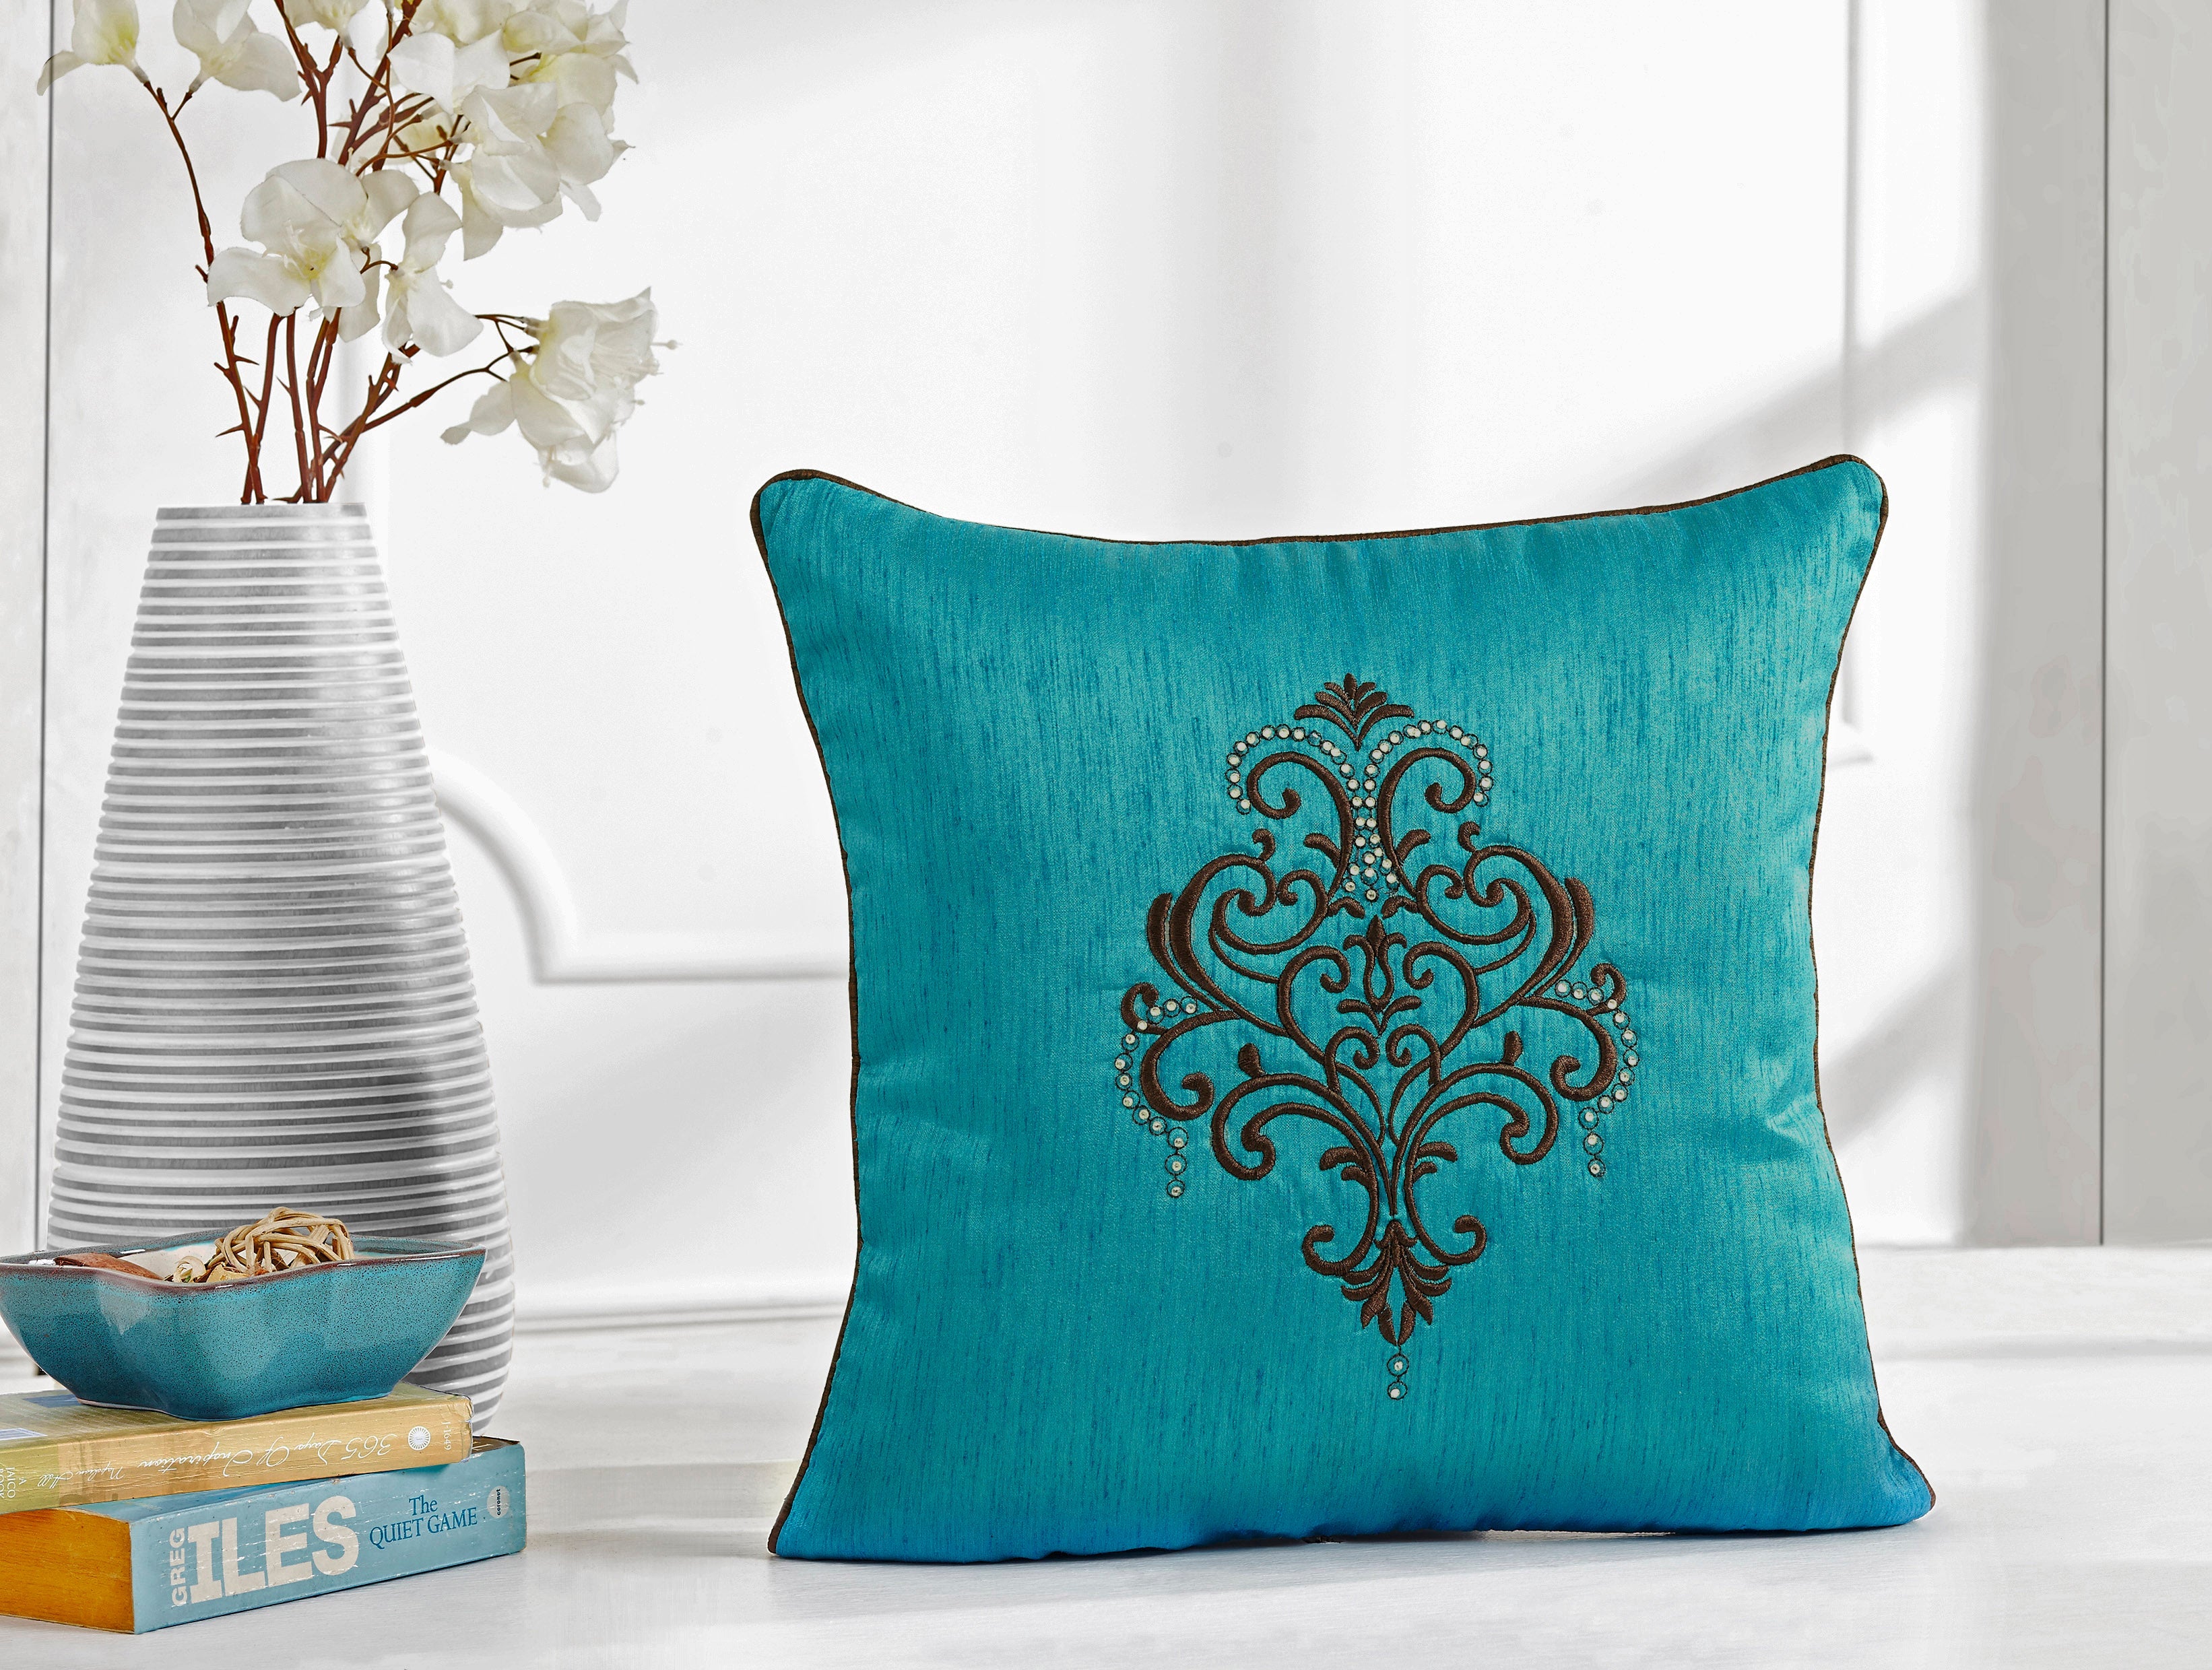 Inde Glow Cushion Cover